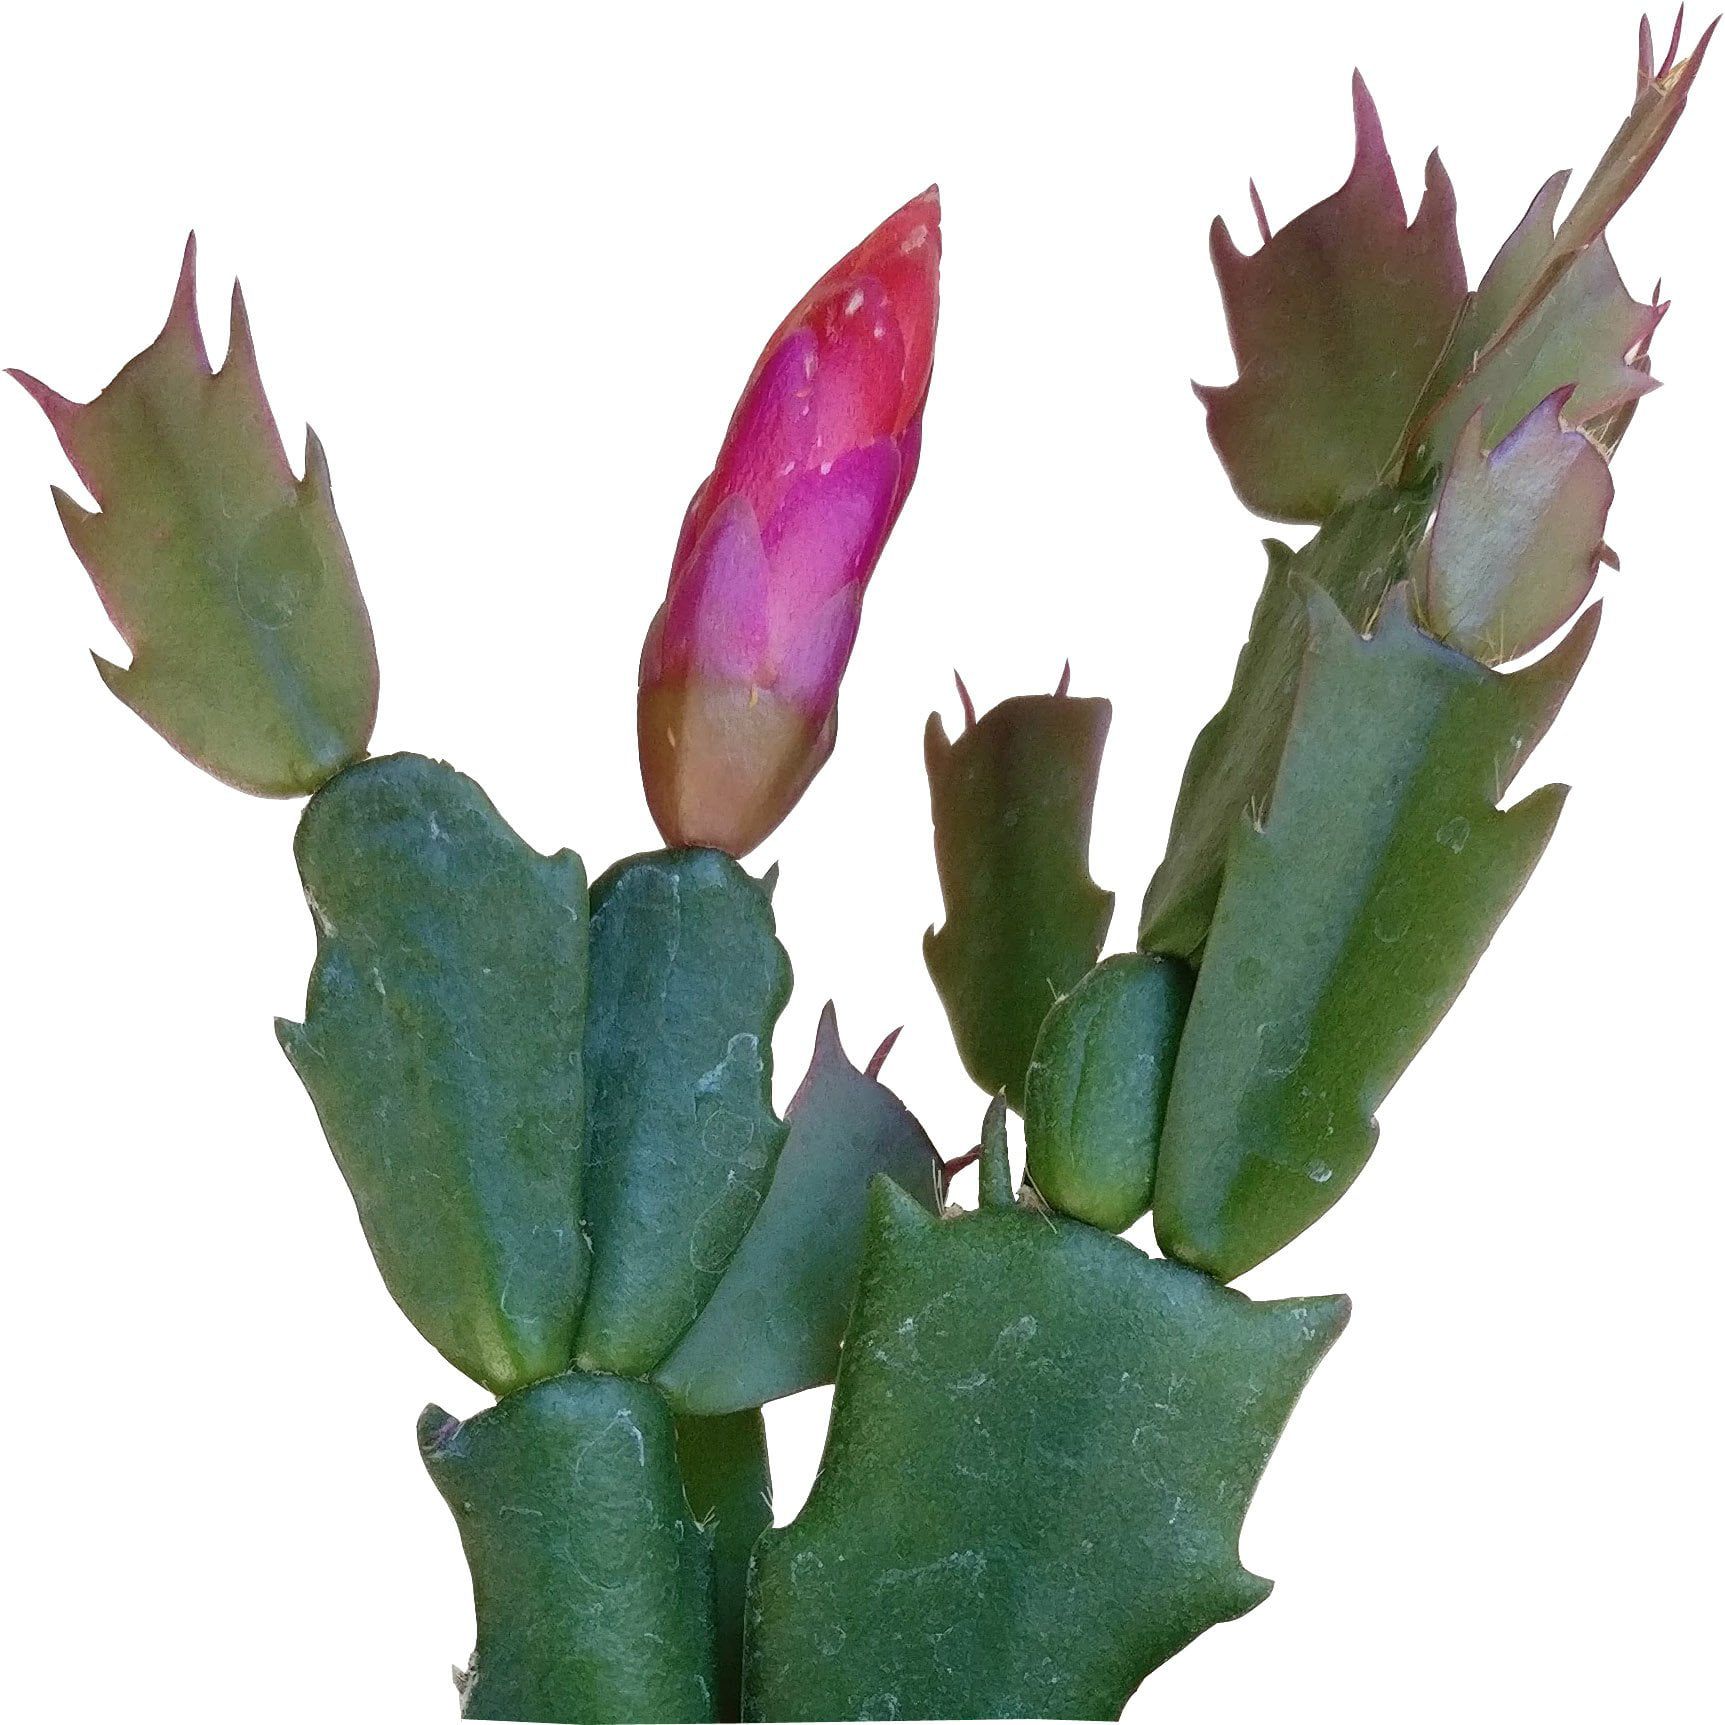 Christmas Cactus Thanksgiving Cactus, Winter Bloom Holiday Cactus - 4 inch